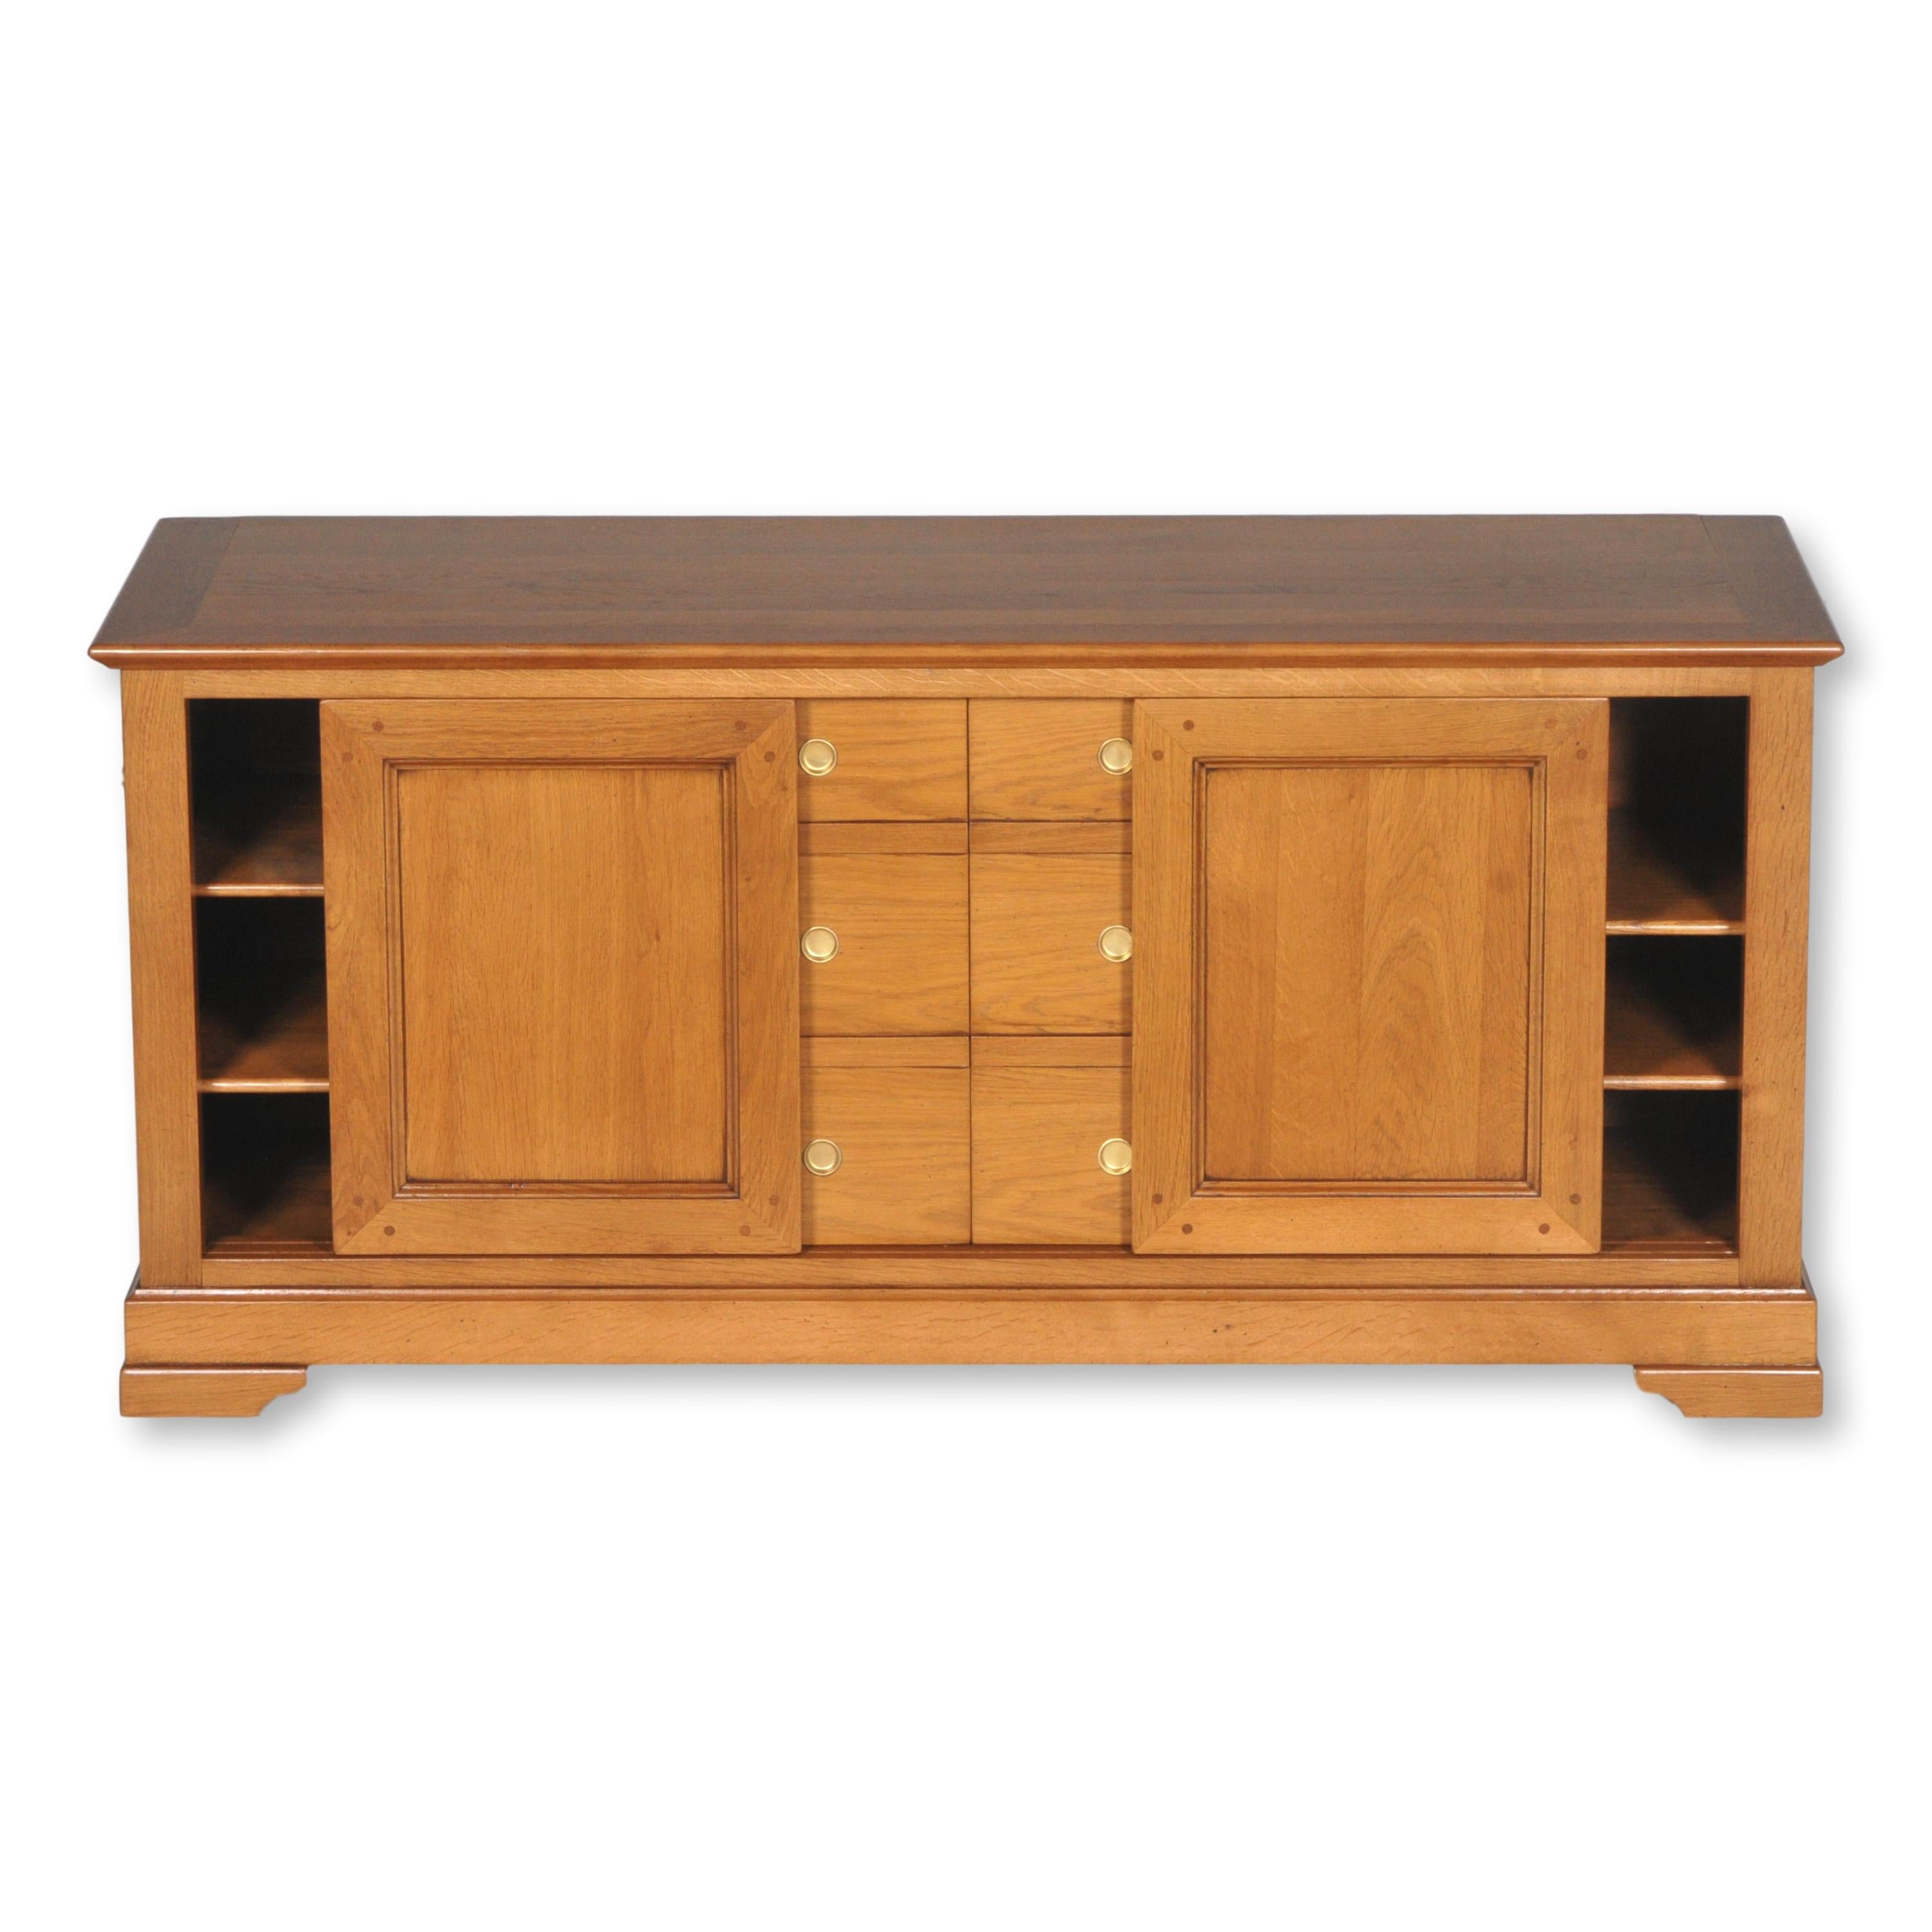 This Cabinet is a handmade interpretation of the French Louis Philippe Style in the mid 19th century in France caracterized by its curved moldings, hand-curved feet and rounded design. 

This piece is made to install your TV screen on top and store